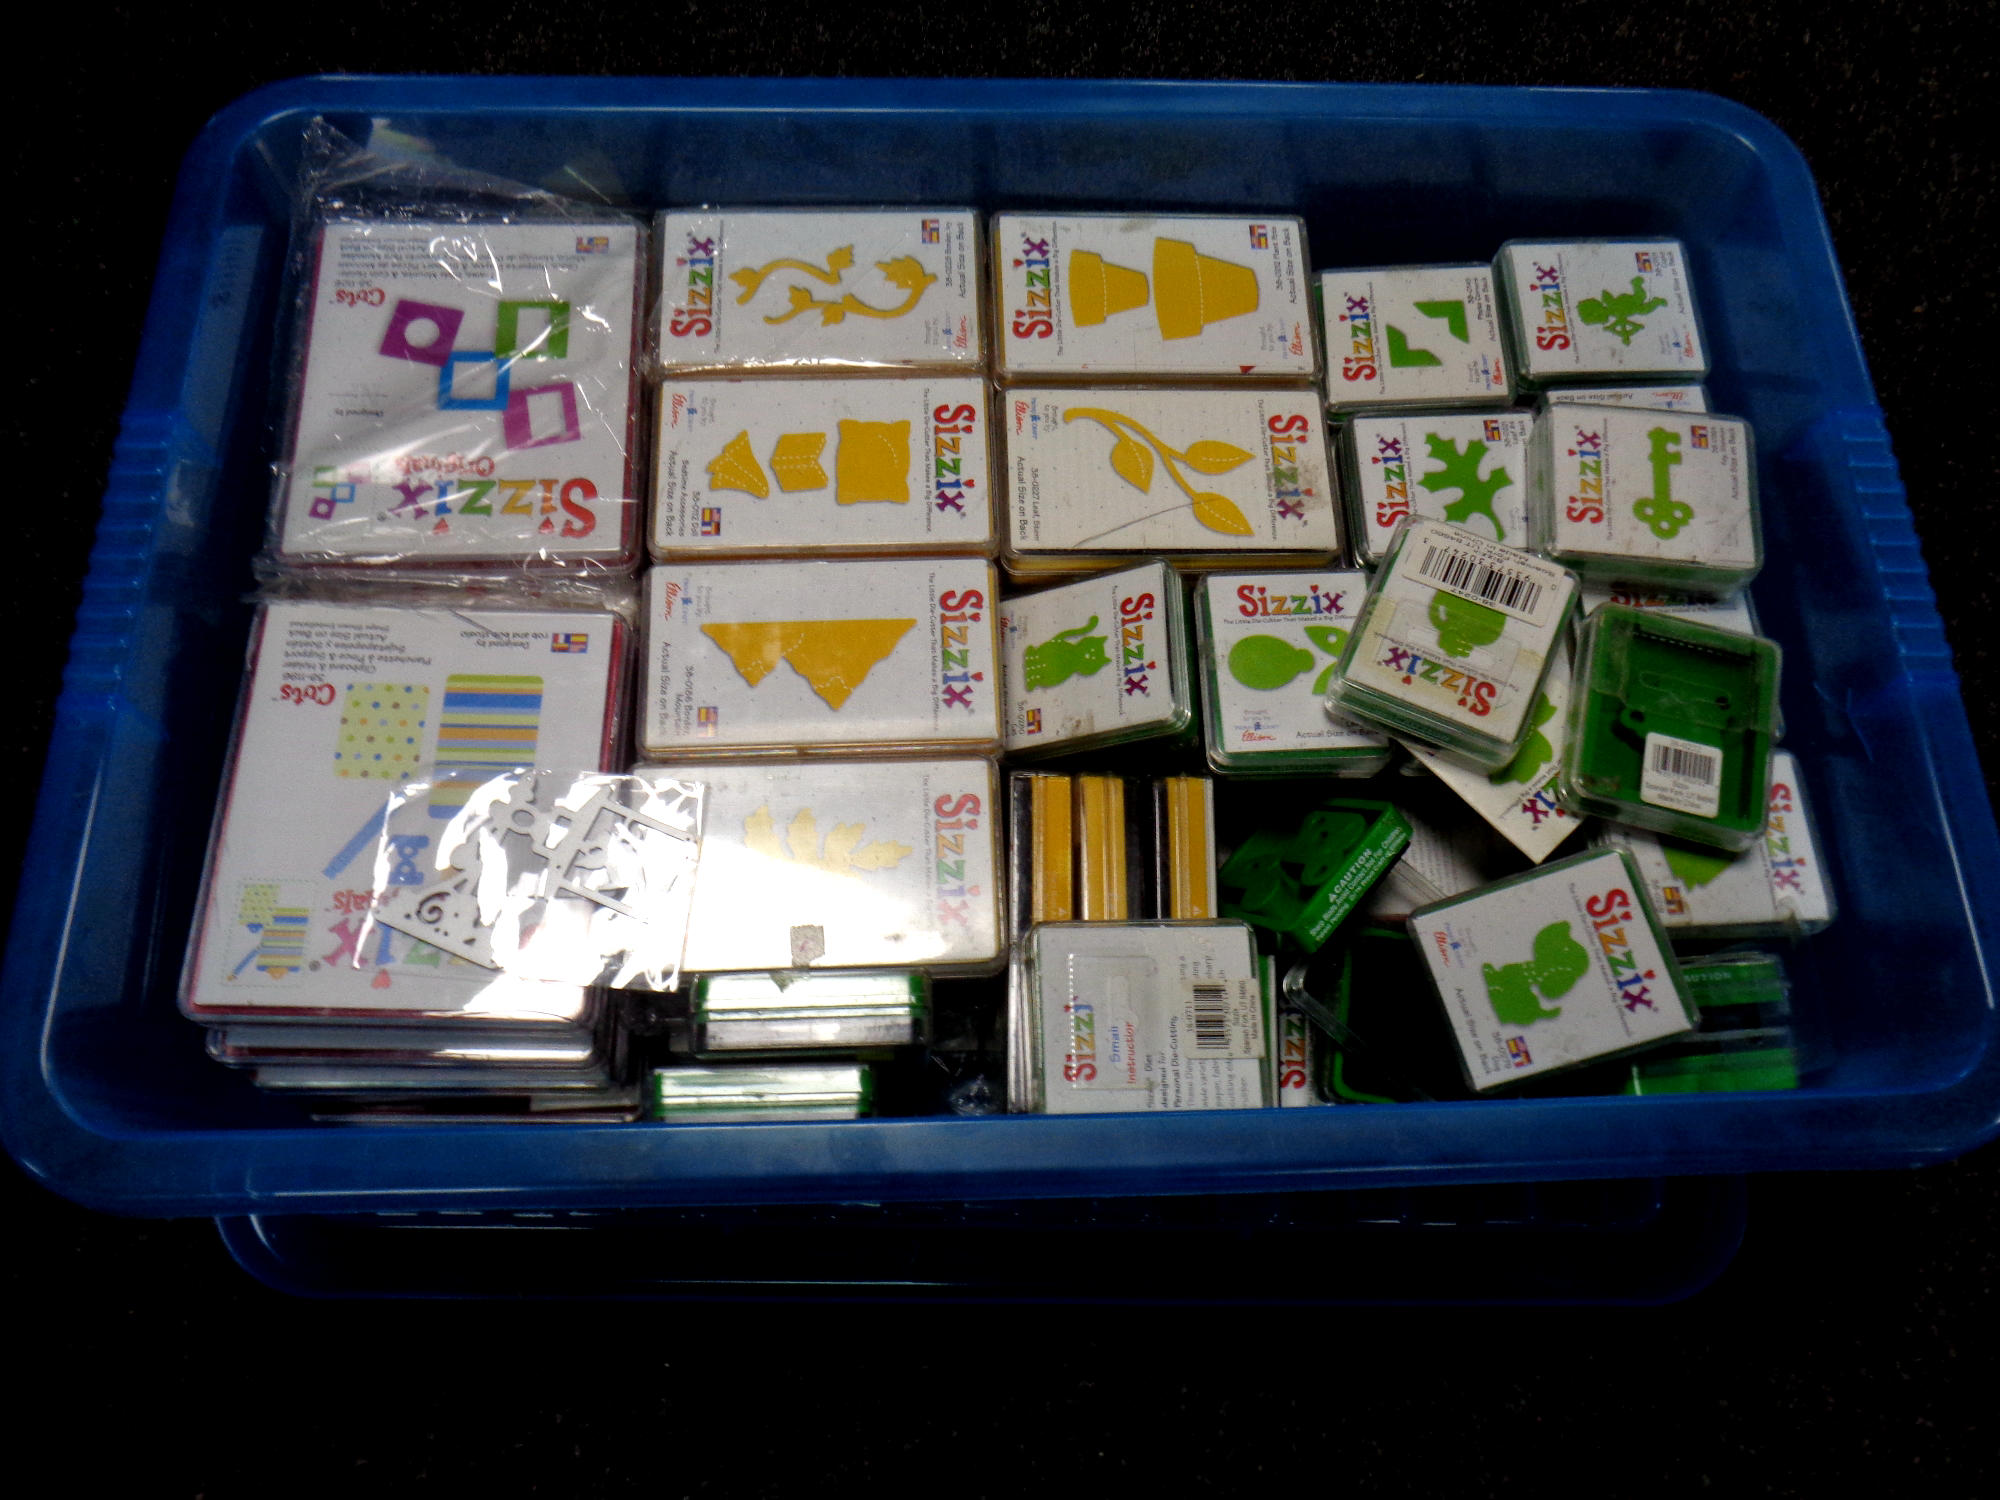 A box containing a large quantity of Sizzix die cutters